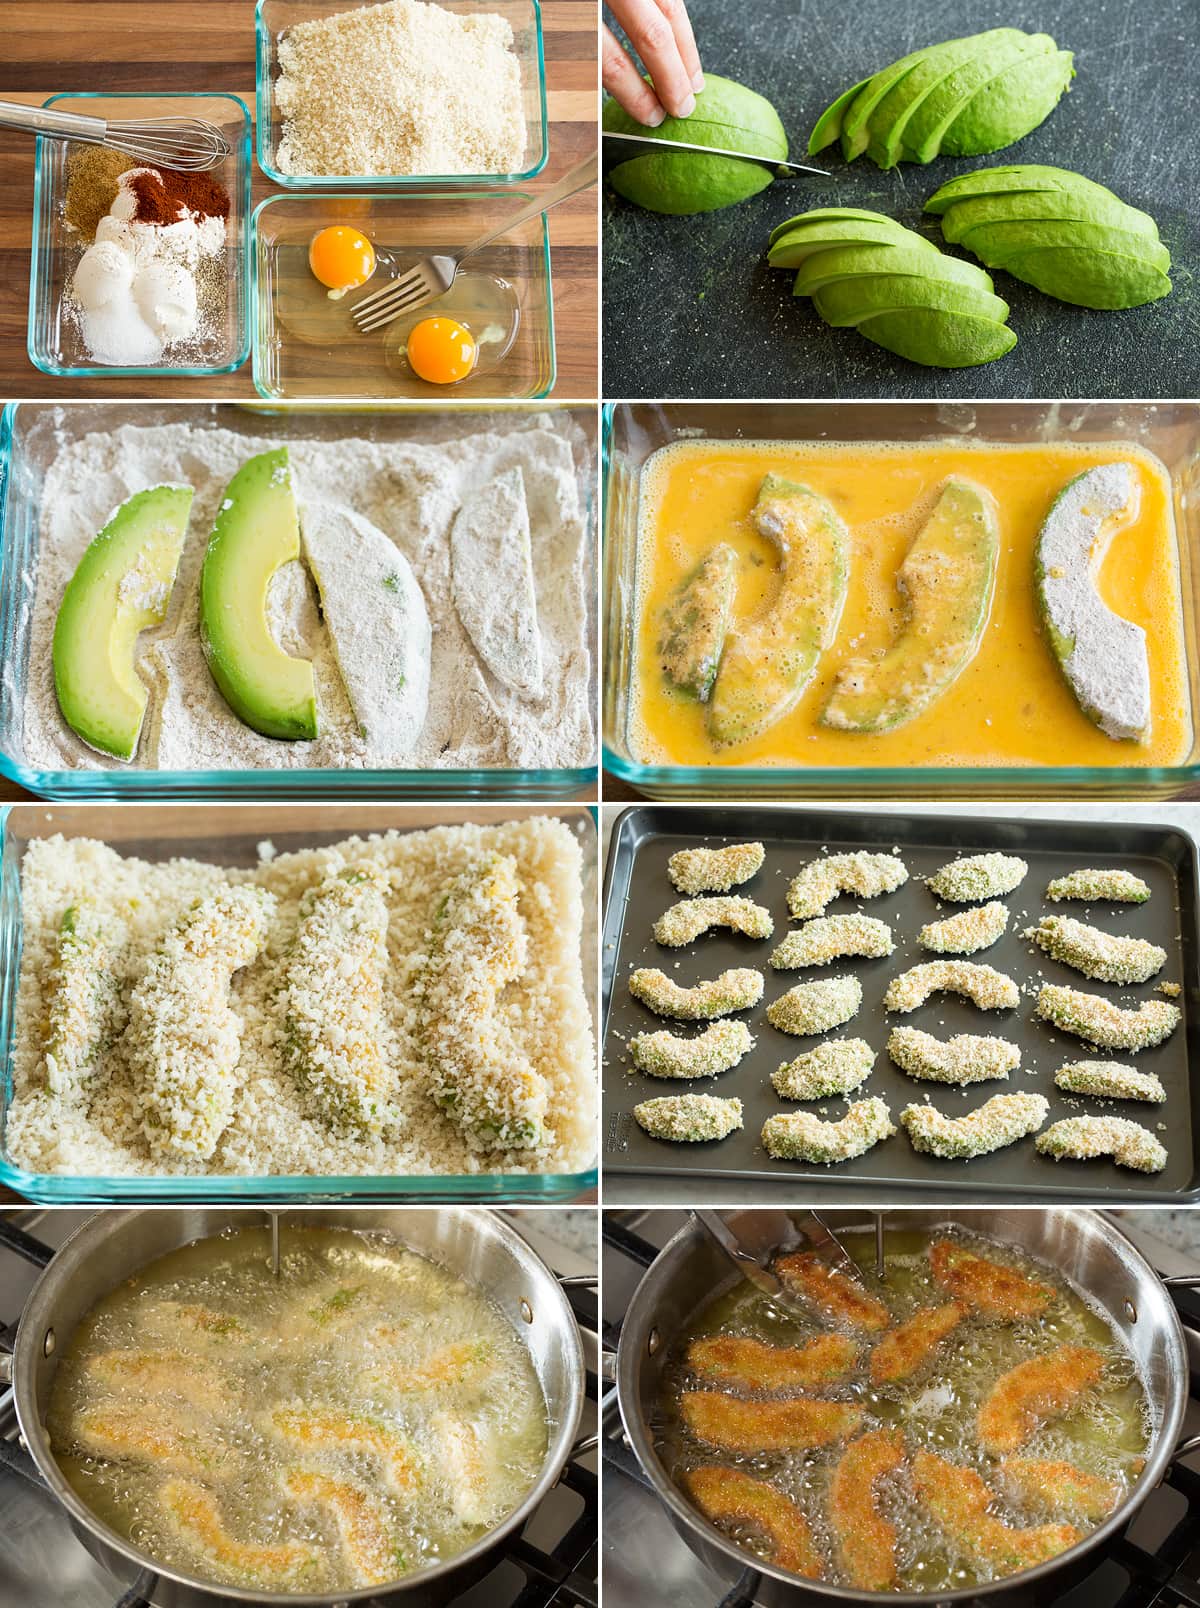 Collage of eight images showing how to bread avocado slices then deep fry in a skillet to make fries.